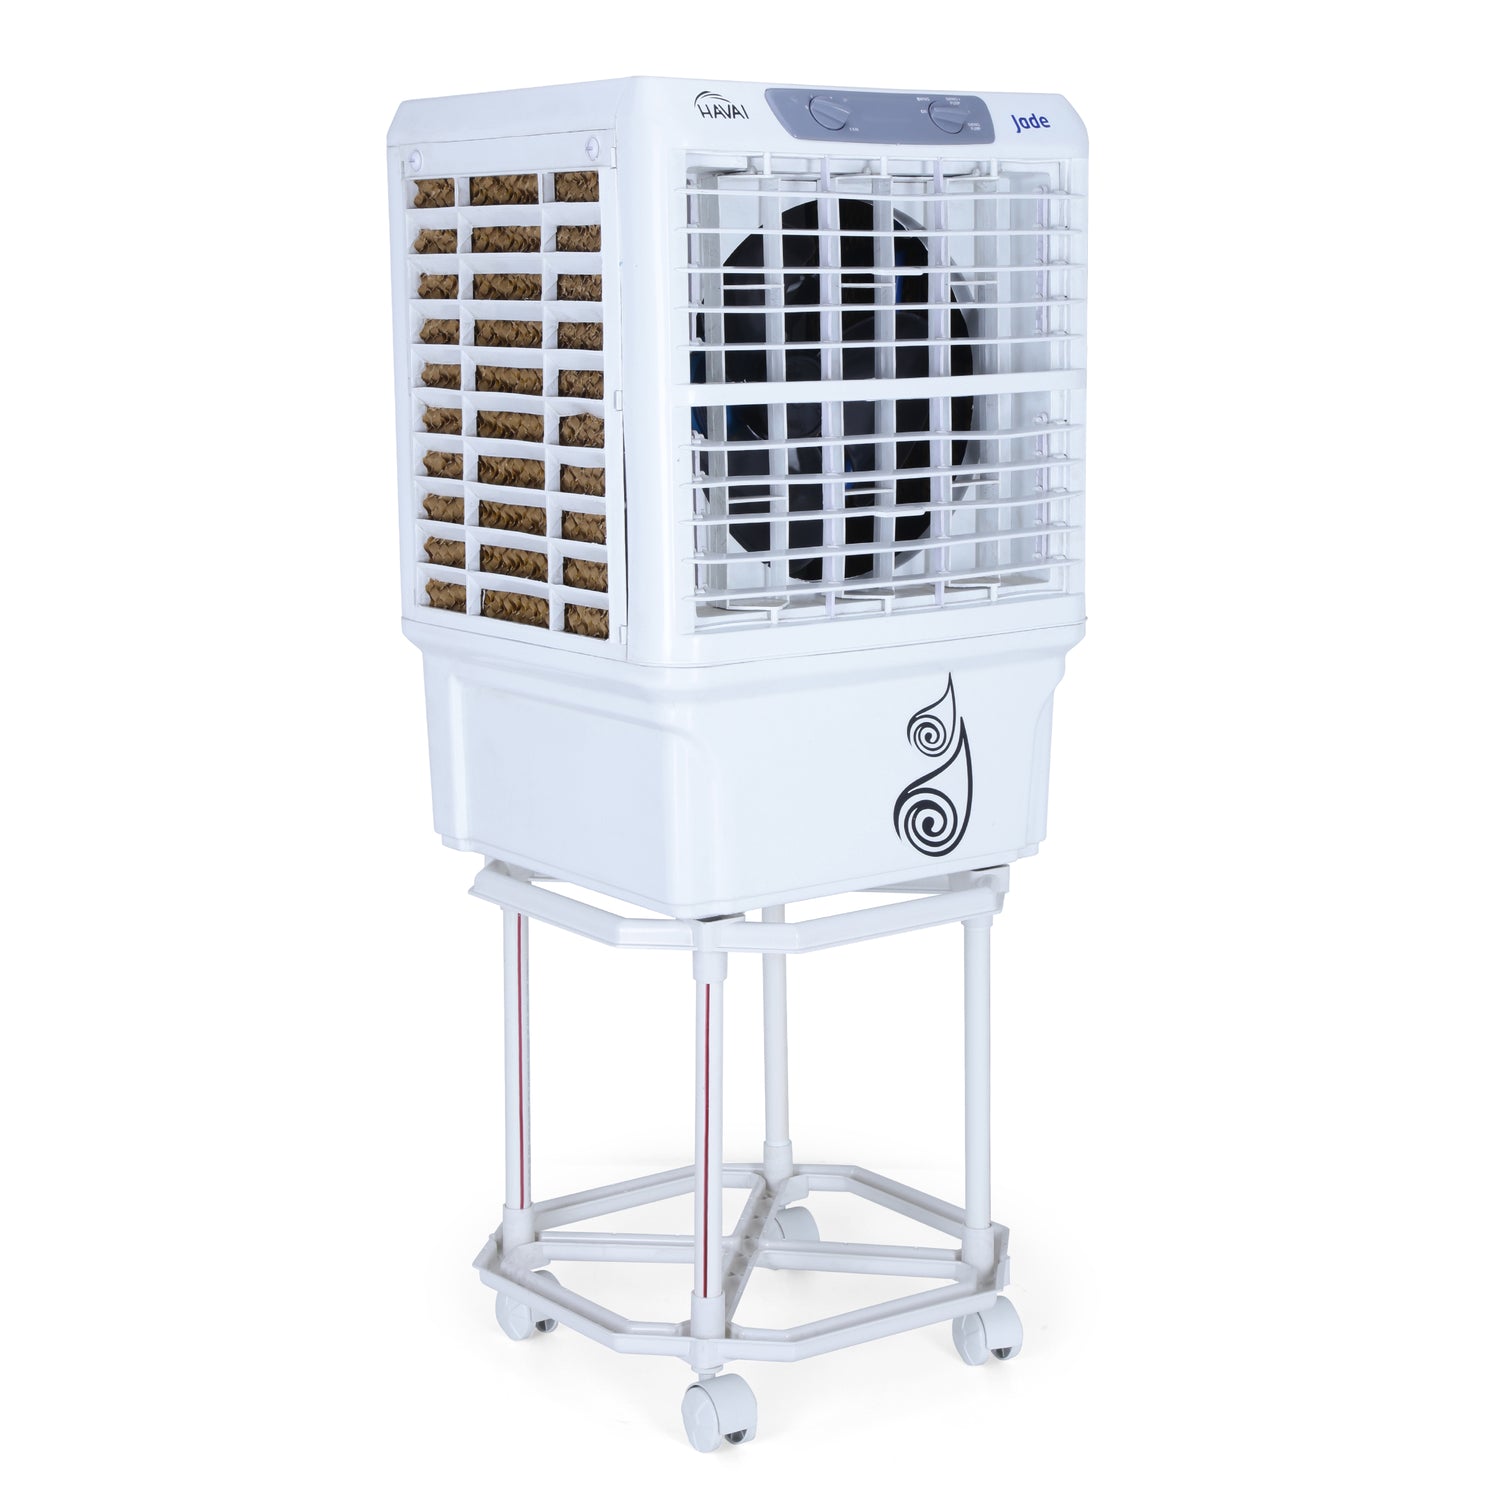 HAVAI Jade Window Cooler with Trolley Included - 30 L, 12 Inch Blade,White